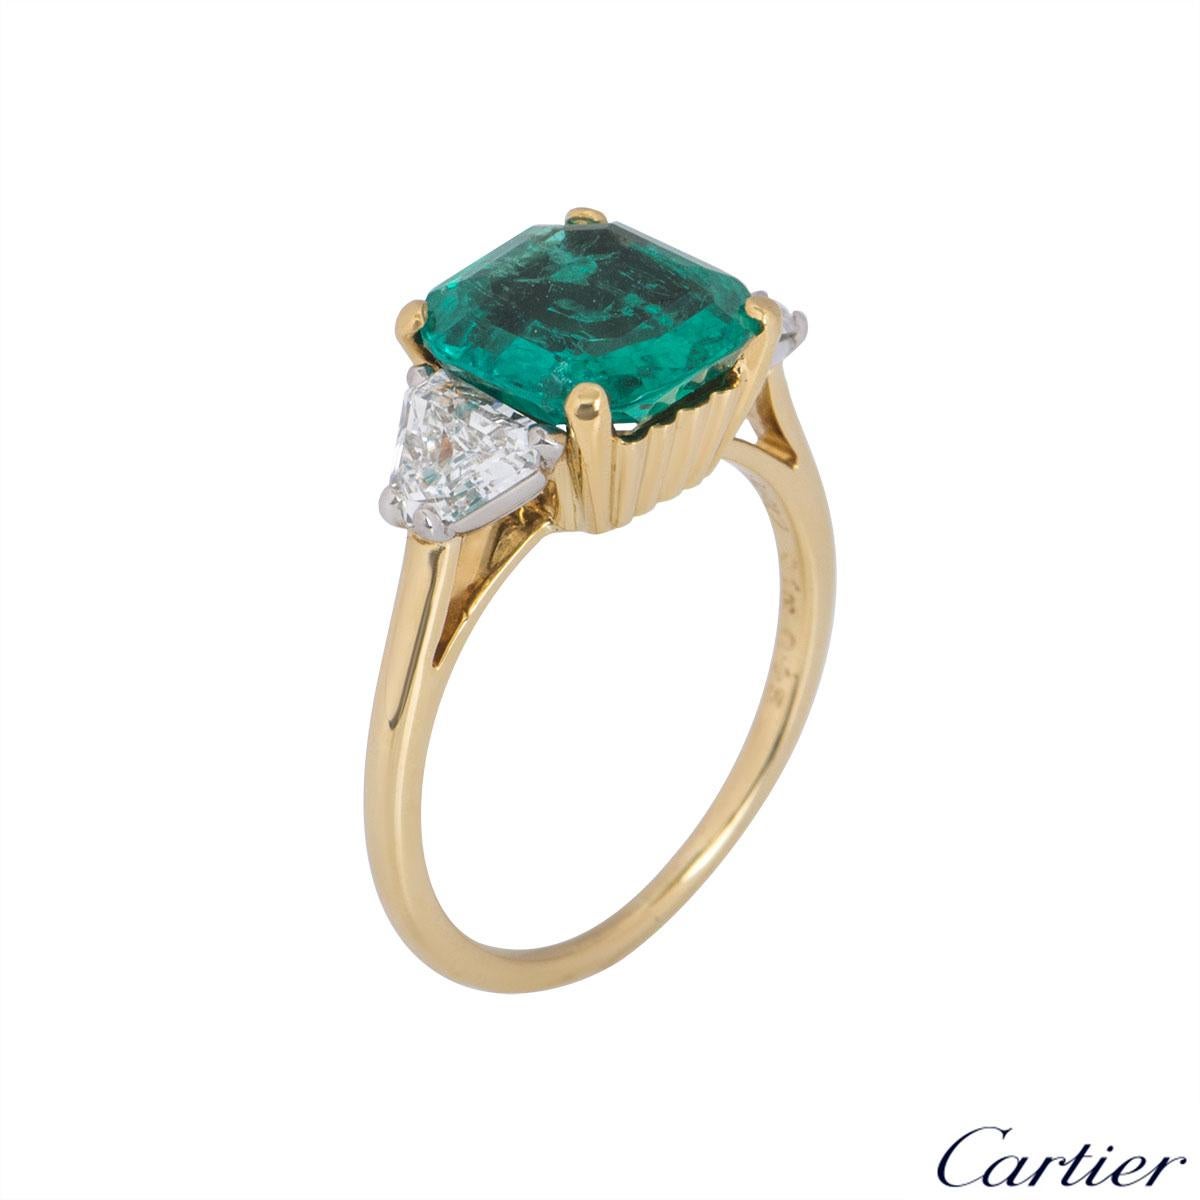 An 18k yellow gold emerald and diamond ring by Cartier. The ring comprises of a cushion cut emerald set with a single trillion diamond on each side in a platinum claw. The cushion cut emerald has an approximate weight of 2.26ct and the trillion cut